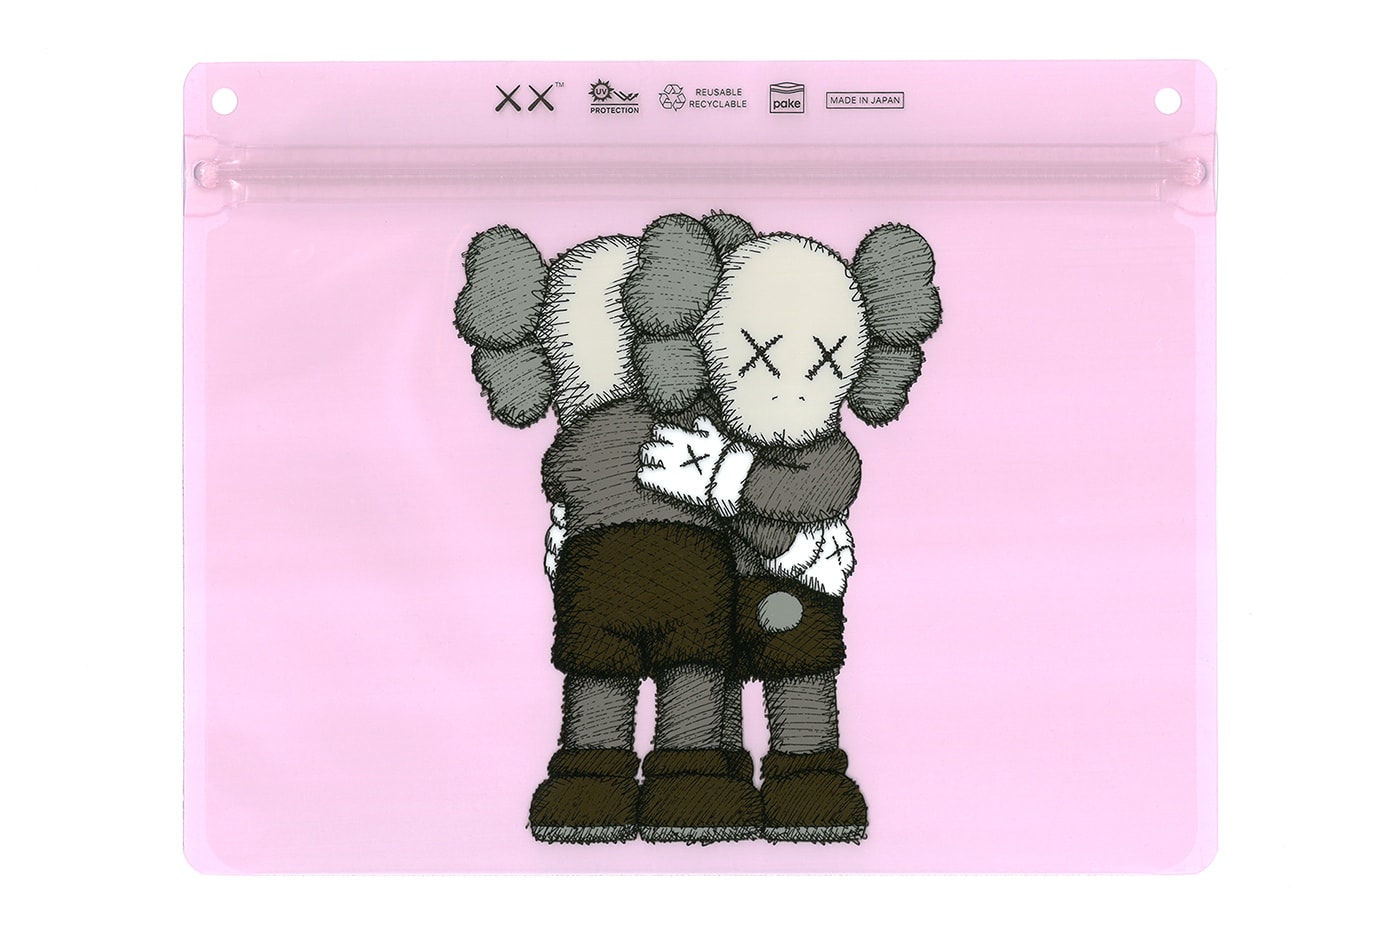 KAWS Pake Collaboration Functional Zip Bags kaws tokyo first multipurpose UV water dust scent proof release